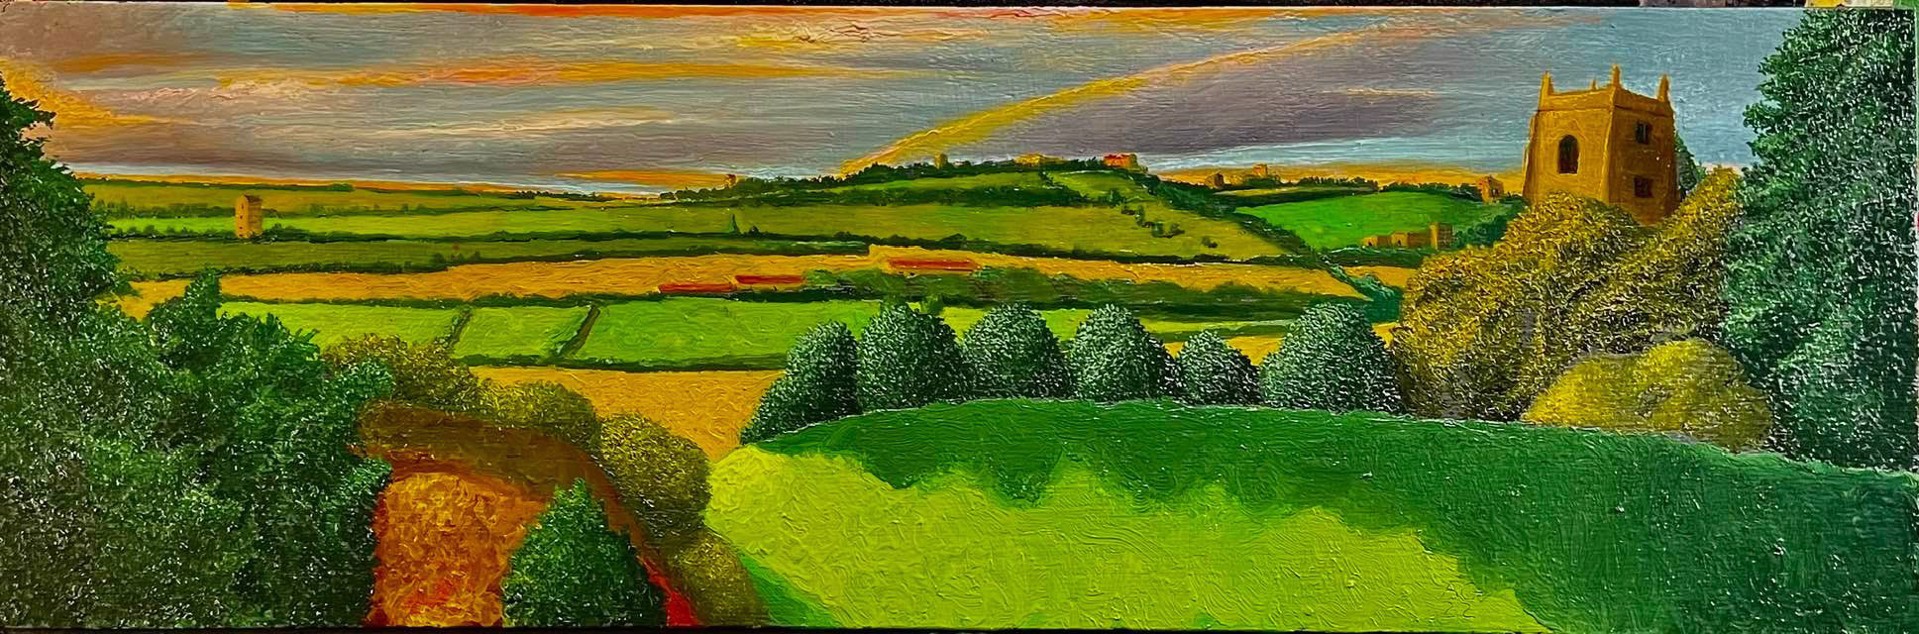 Landscape with Tower (M270) by Alan Gerson